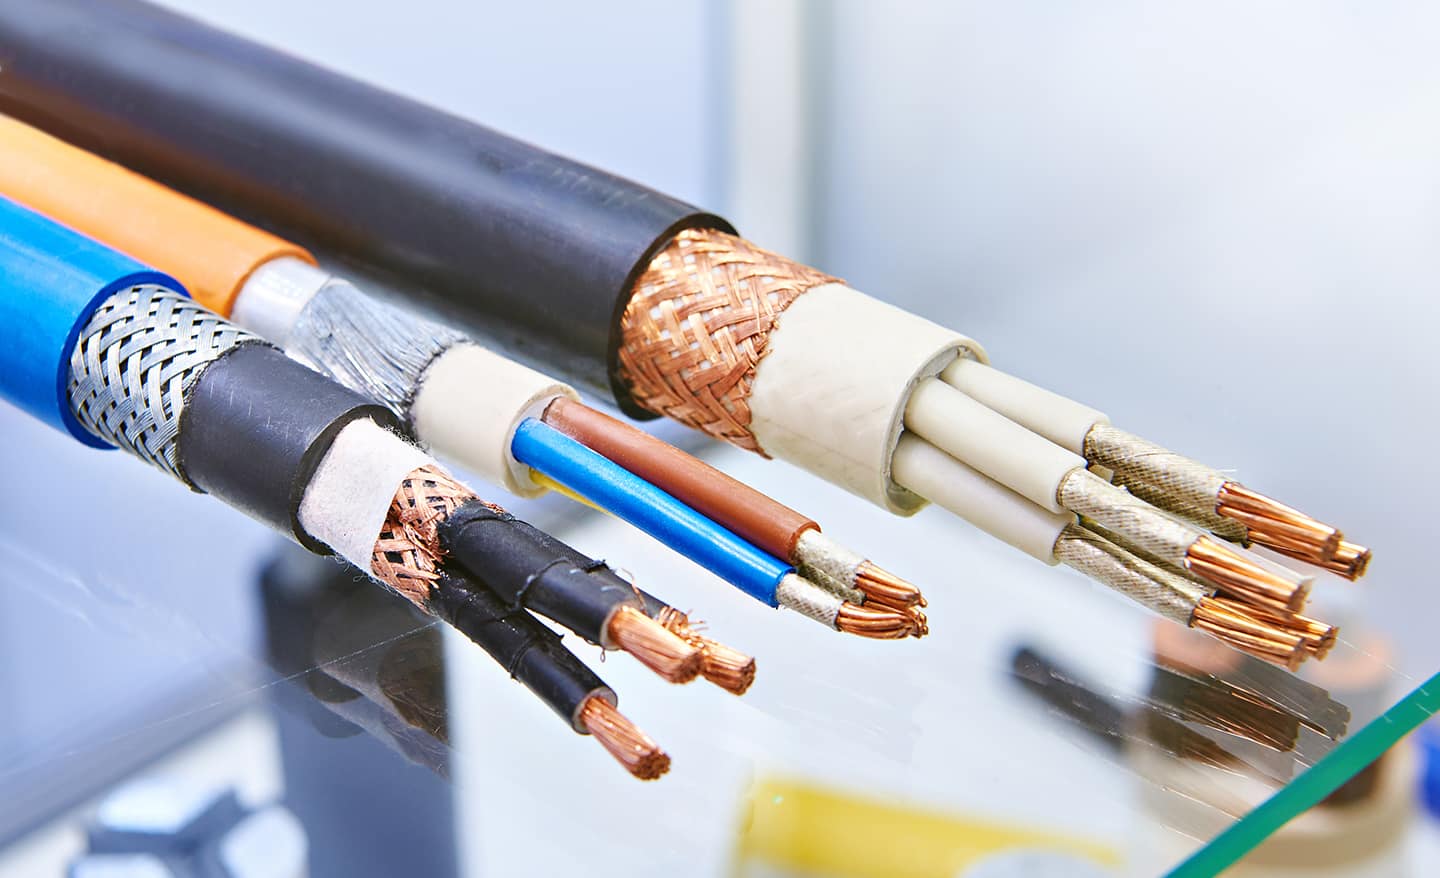 What's the basic difference between wires and cables?